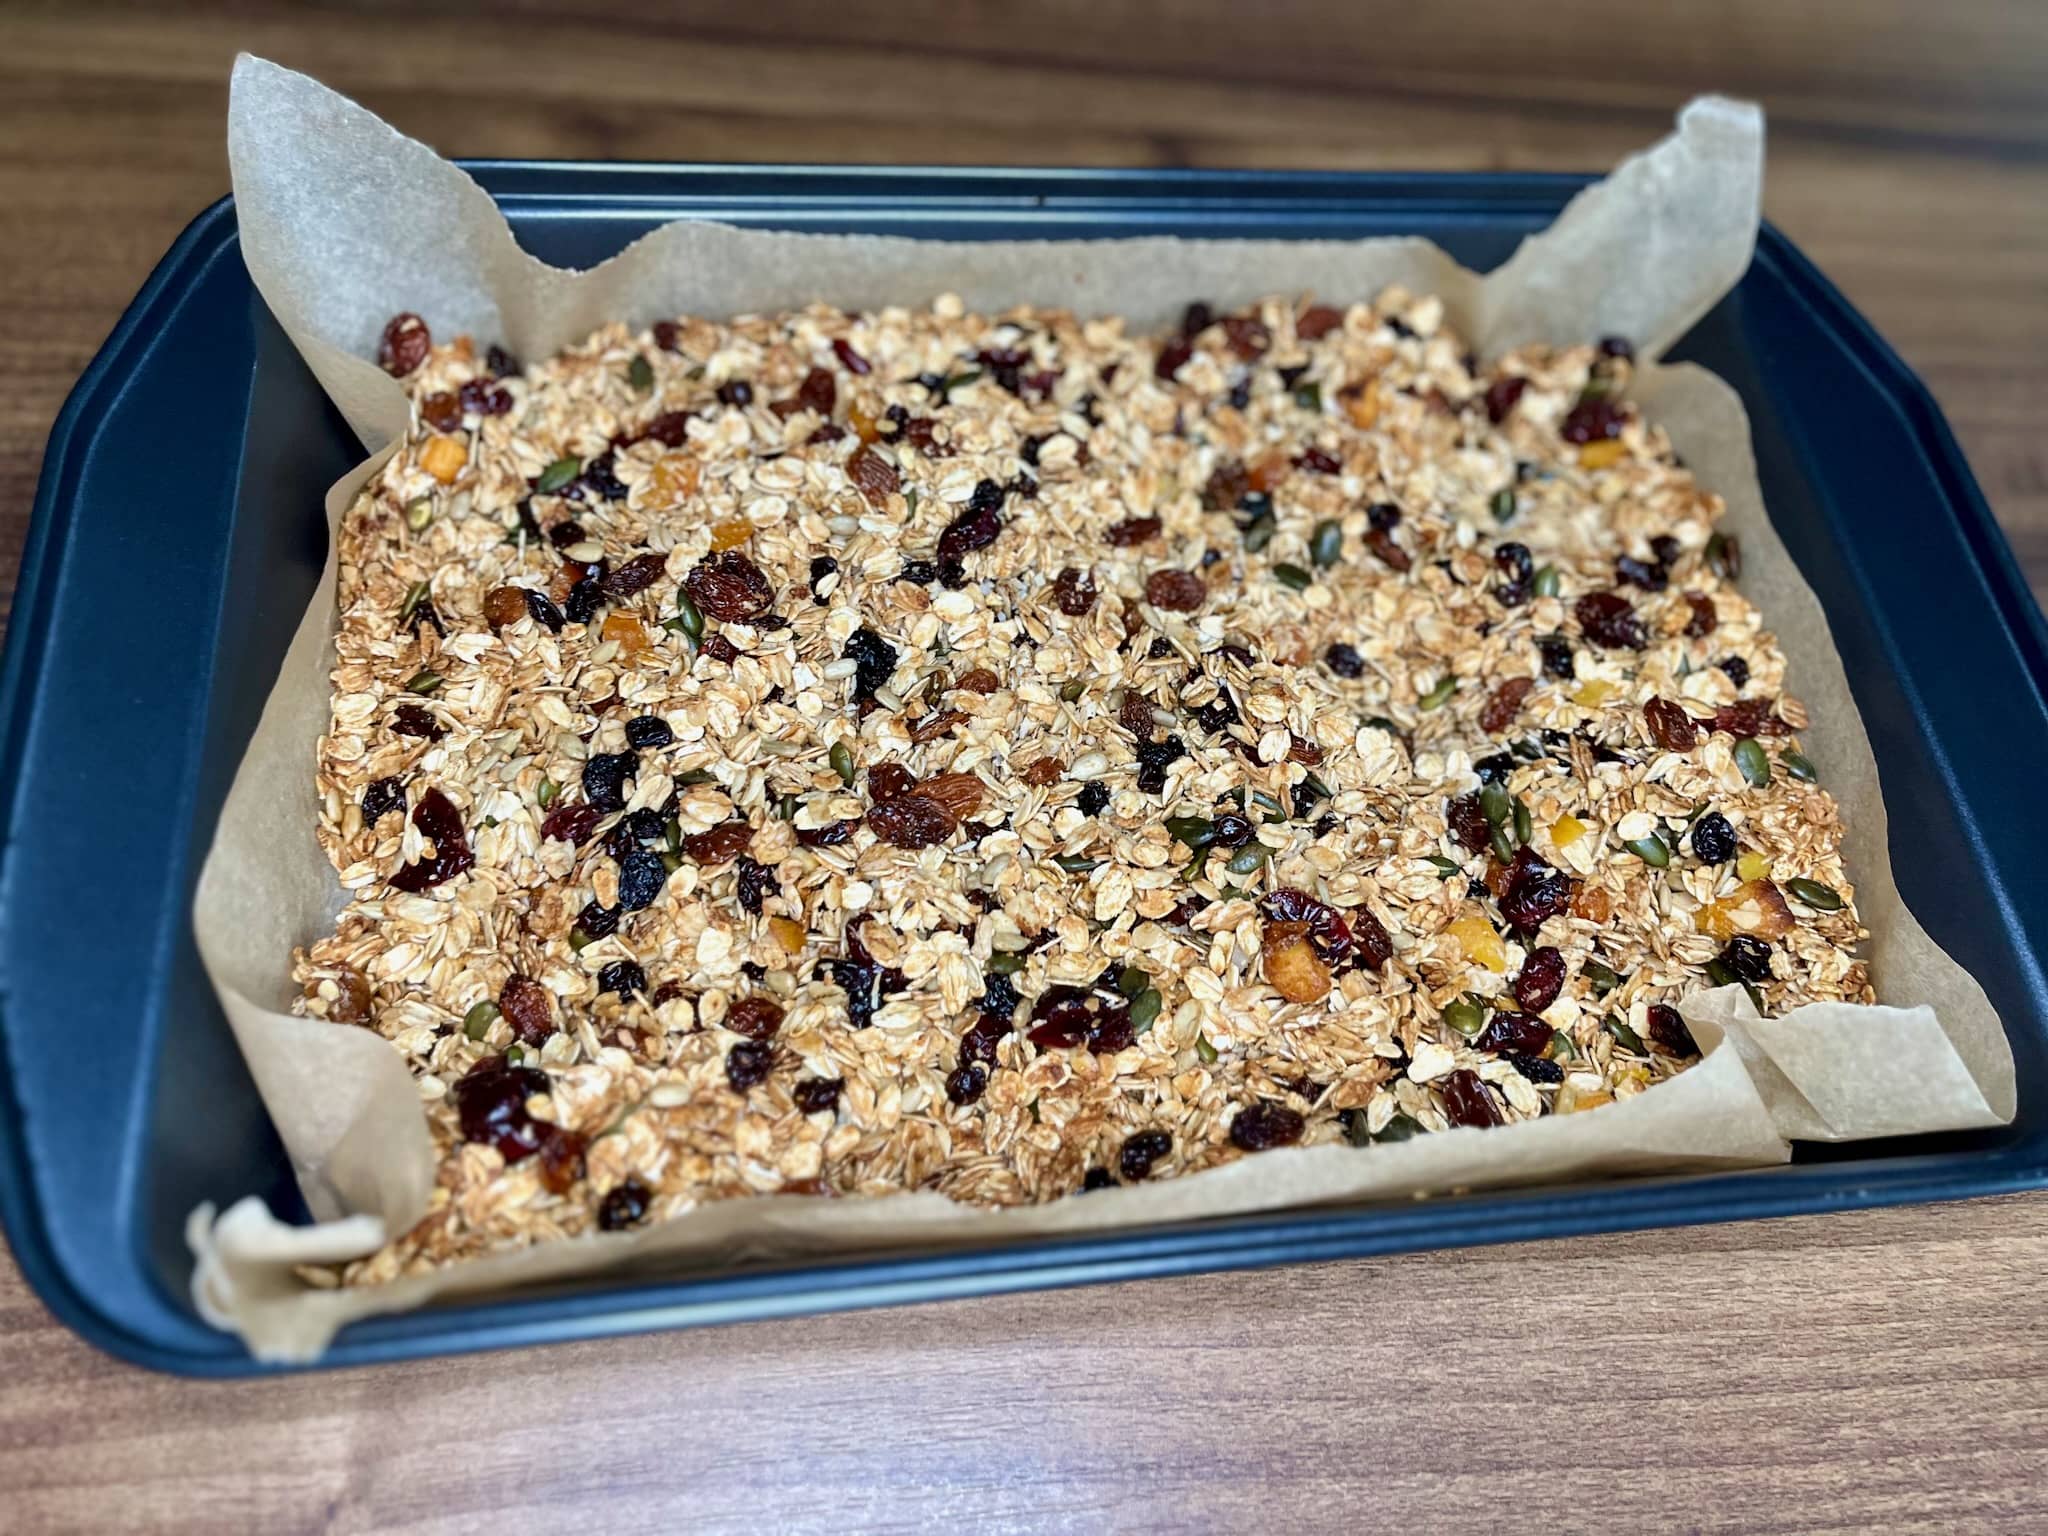 Nicely baked nut-free homemade granola in a baking tray